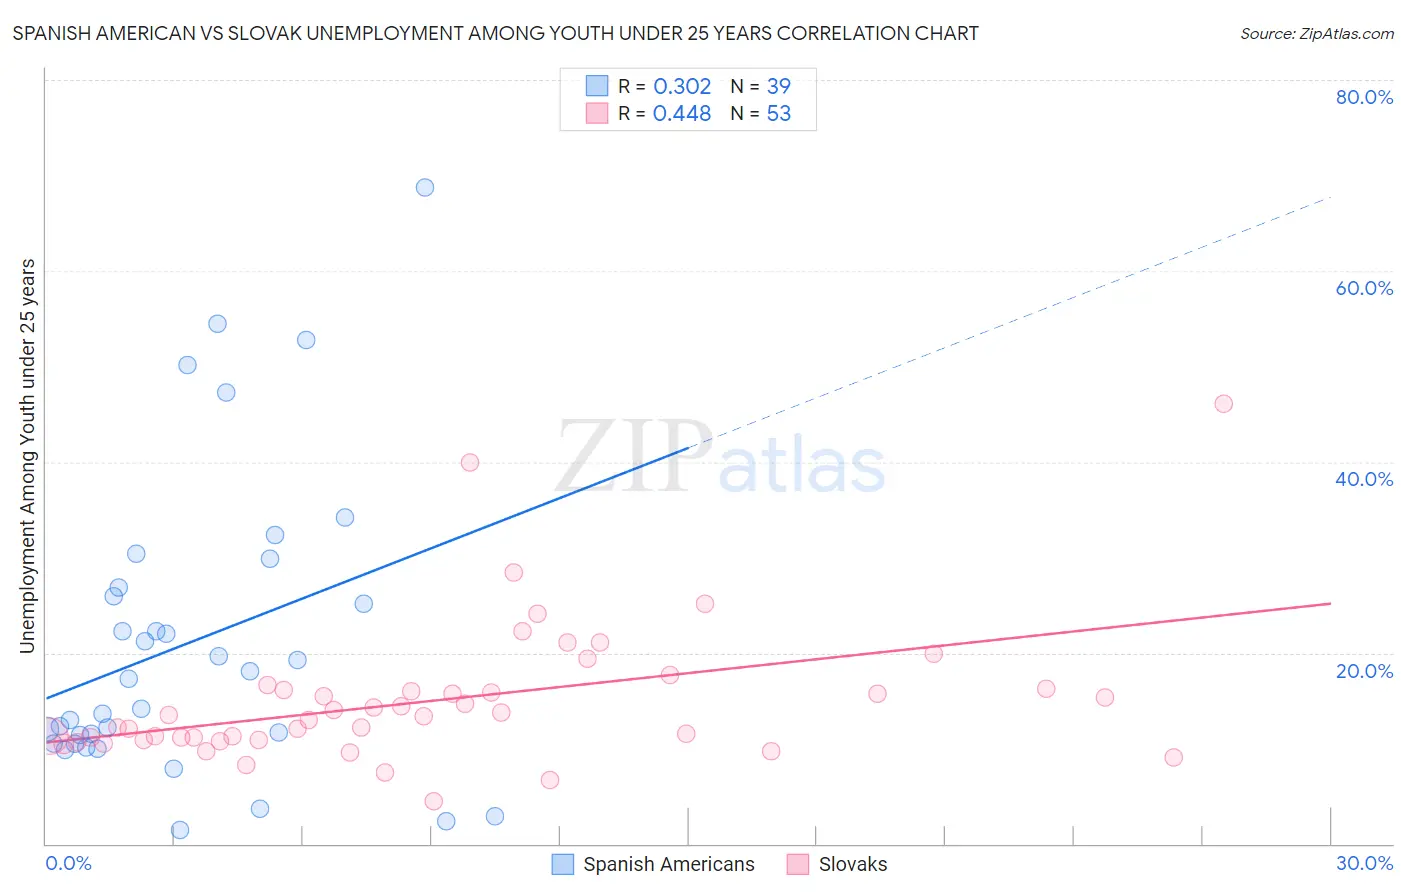 Spanish American vs Slovak Unemployment Among Youth under 25 years